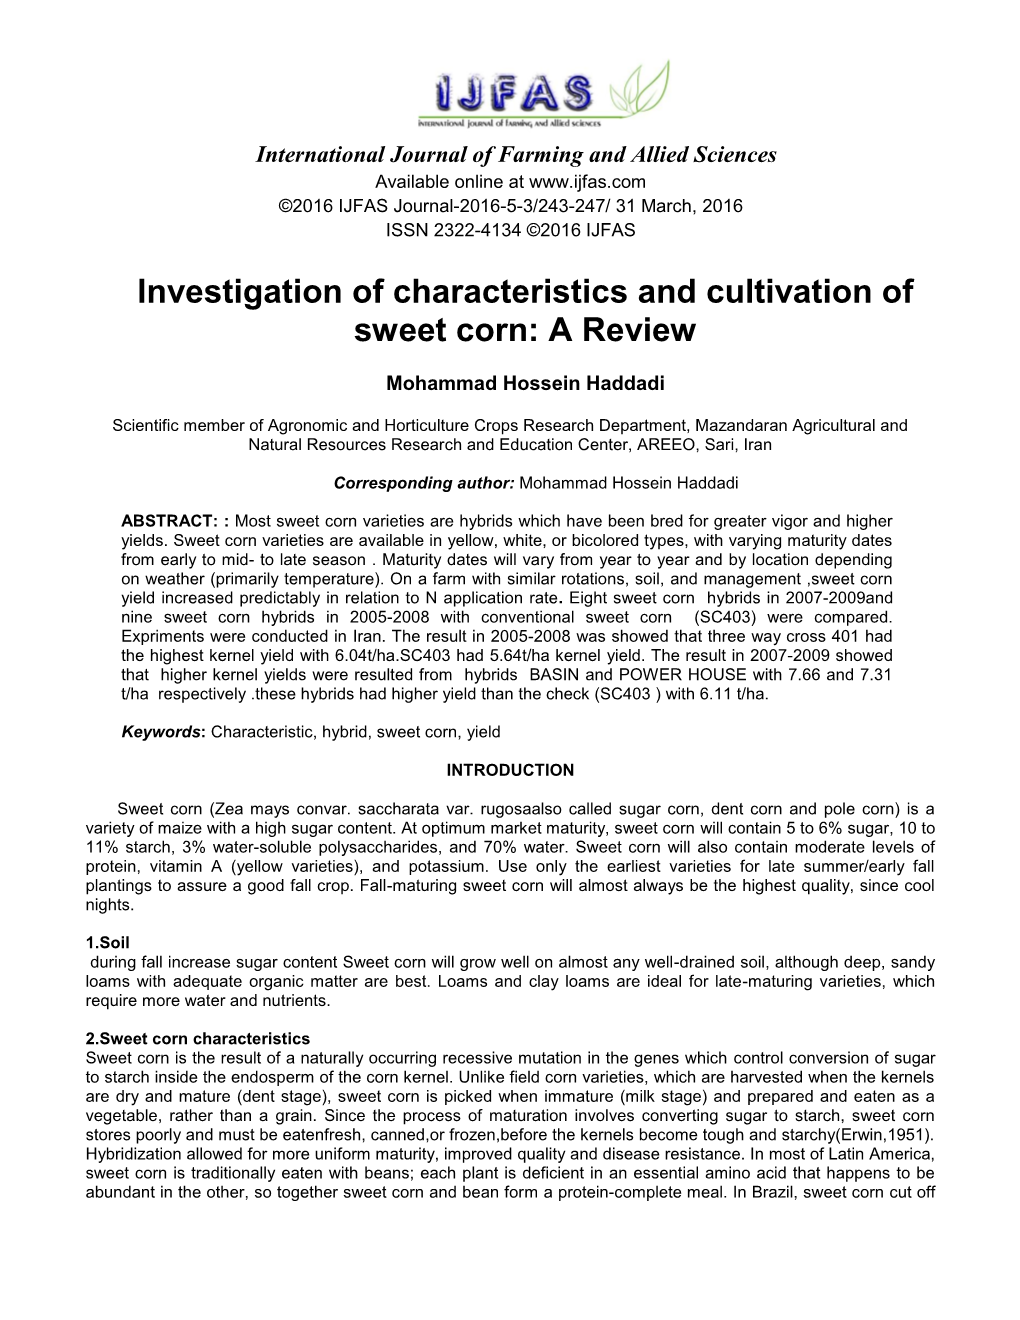 Investigation of Characteristics and Cultivation of Sweet Corn: a Review